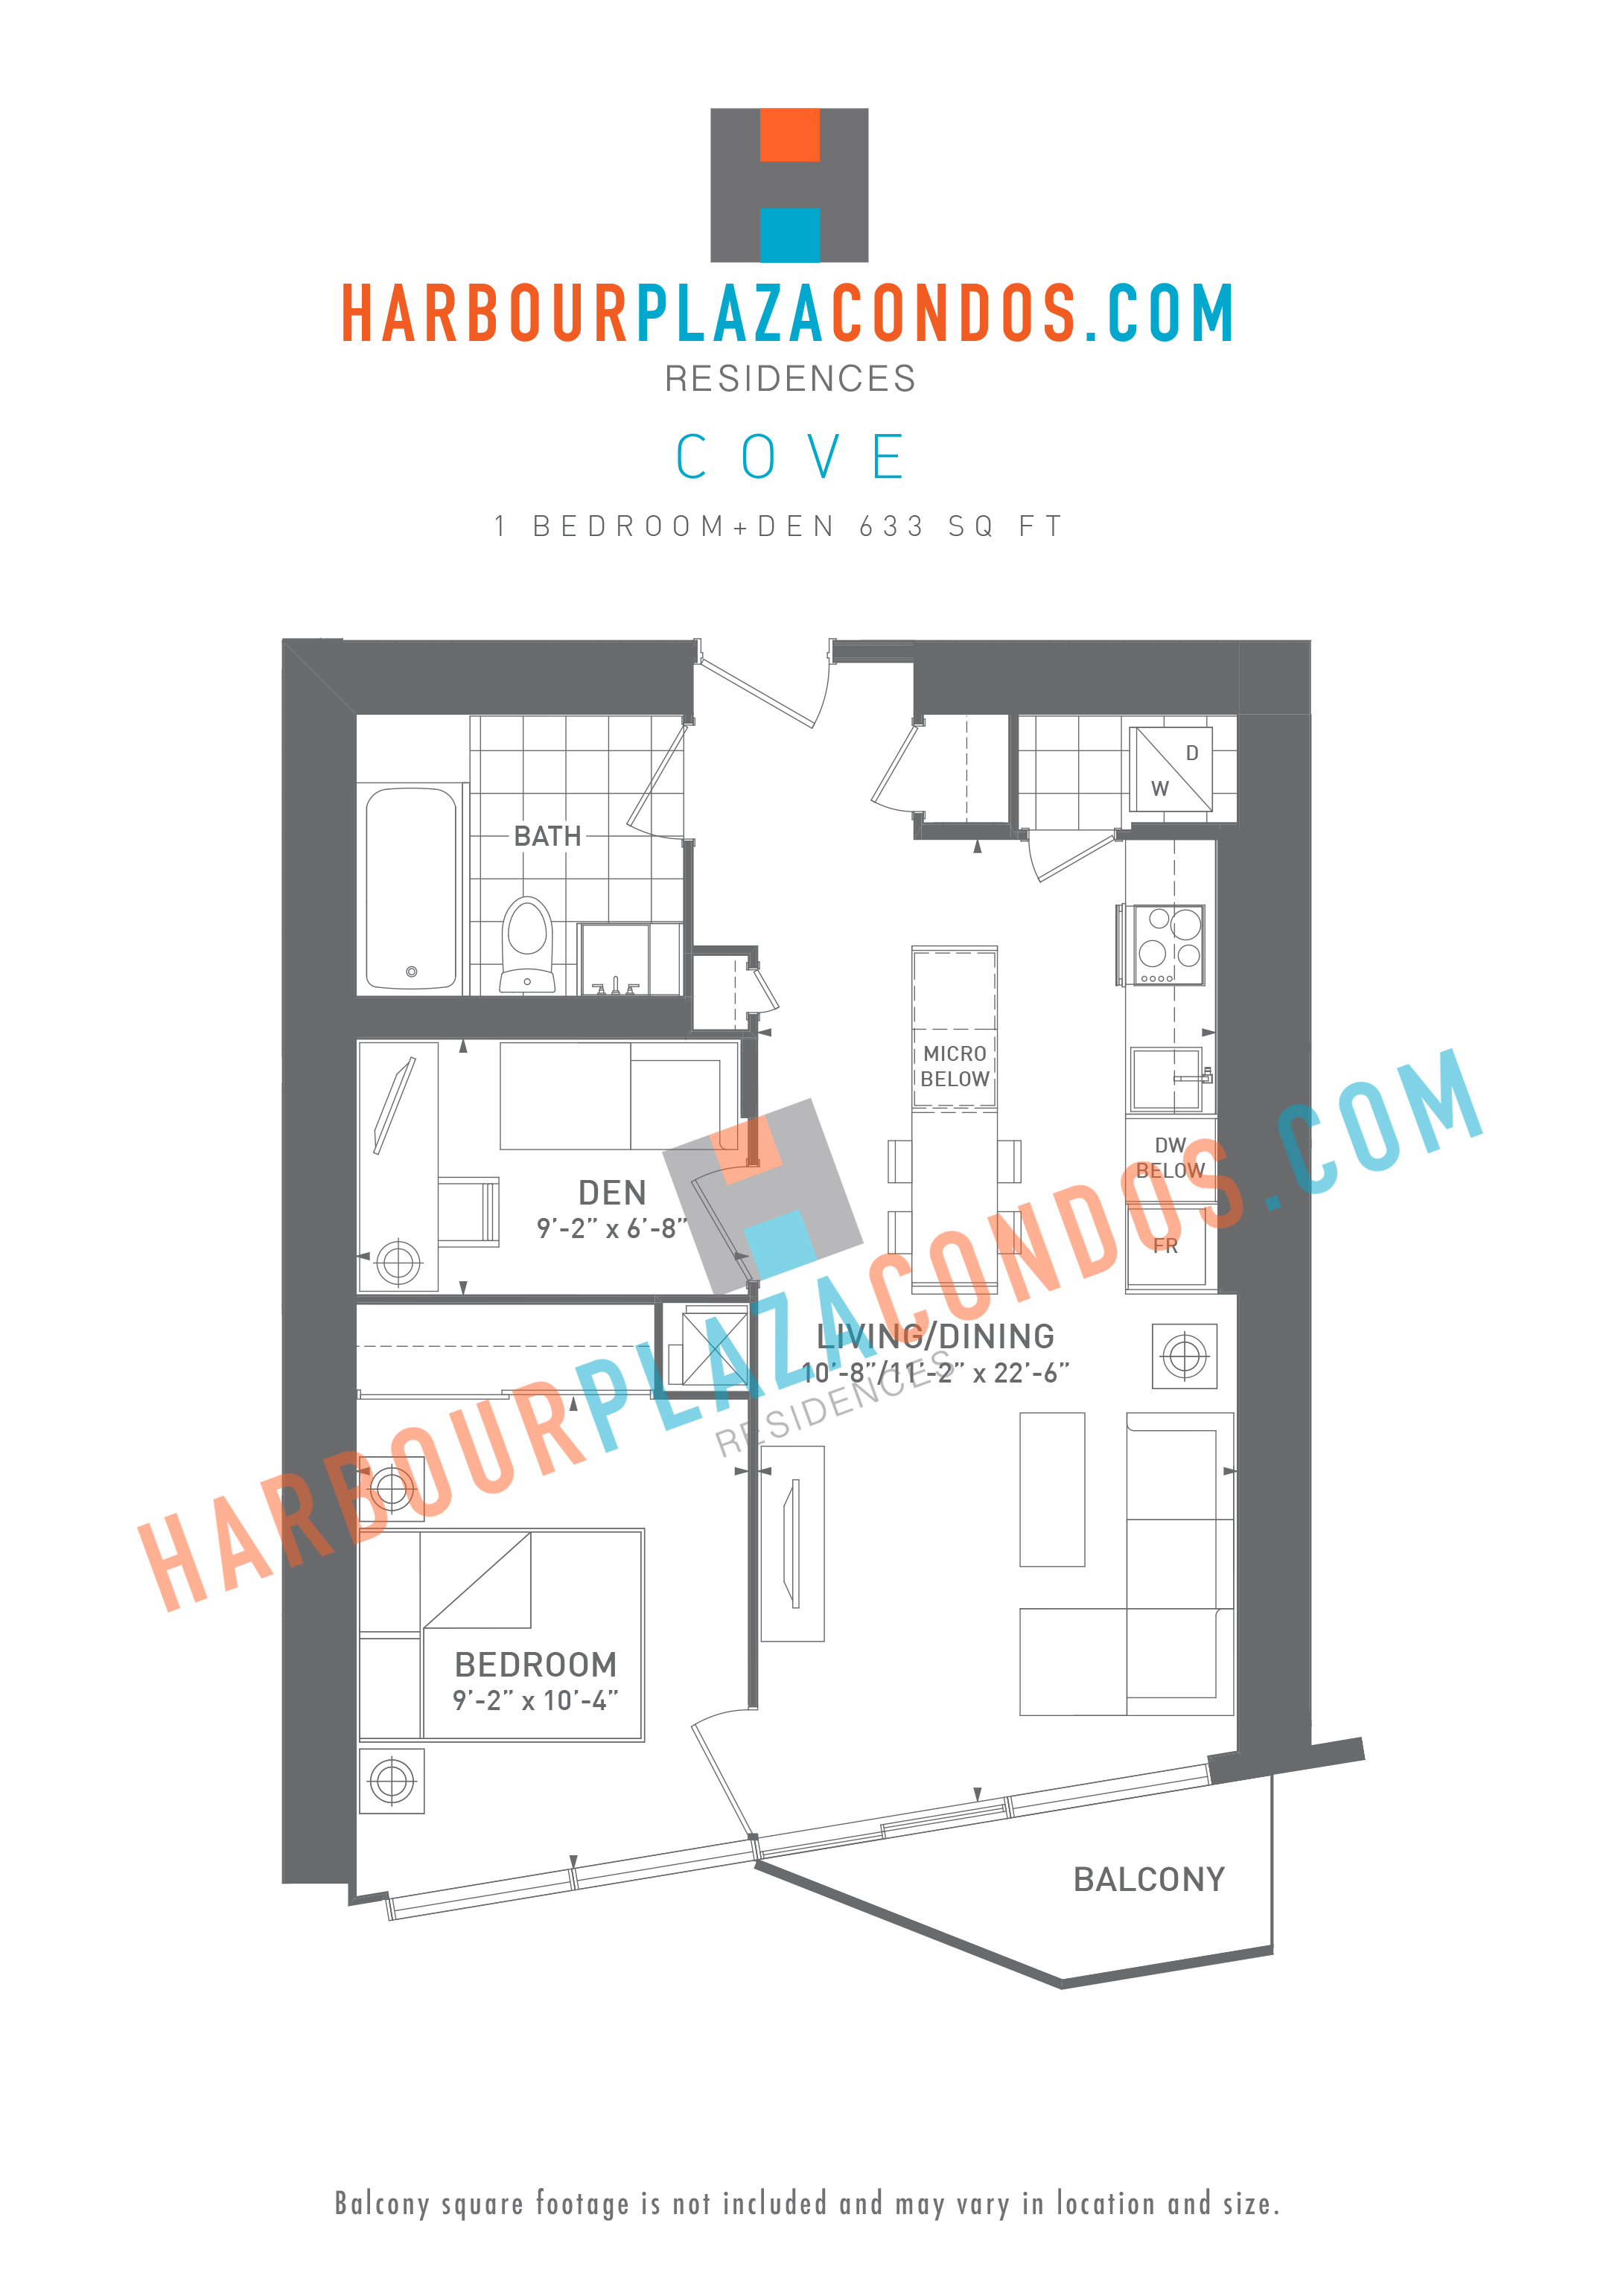 100 Harbour Street Harbour Plaza Condos For Sale / Rent